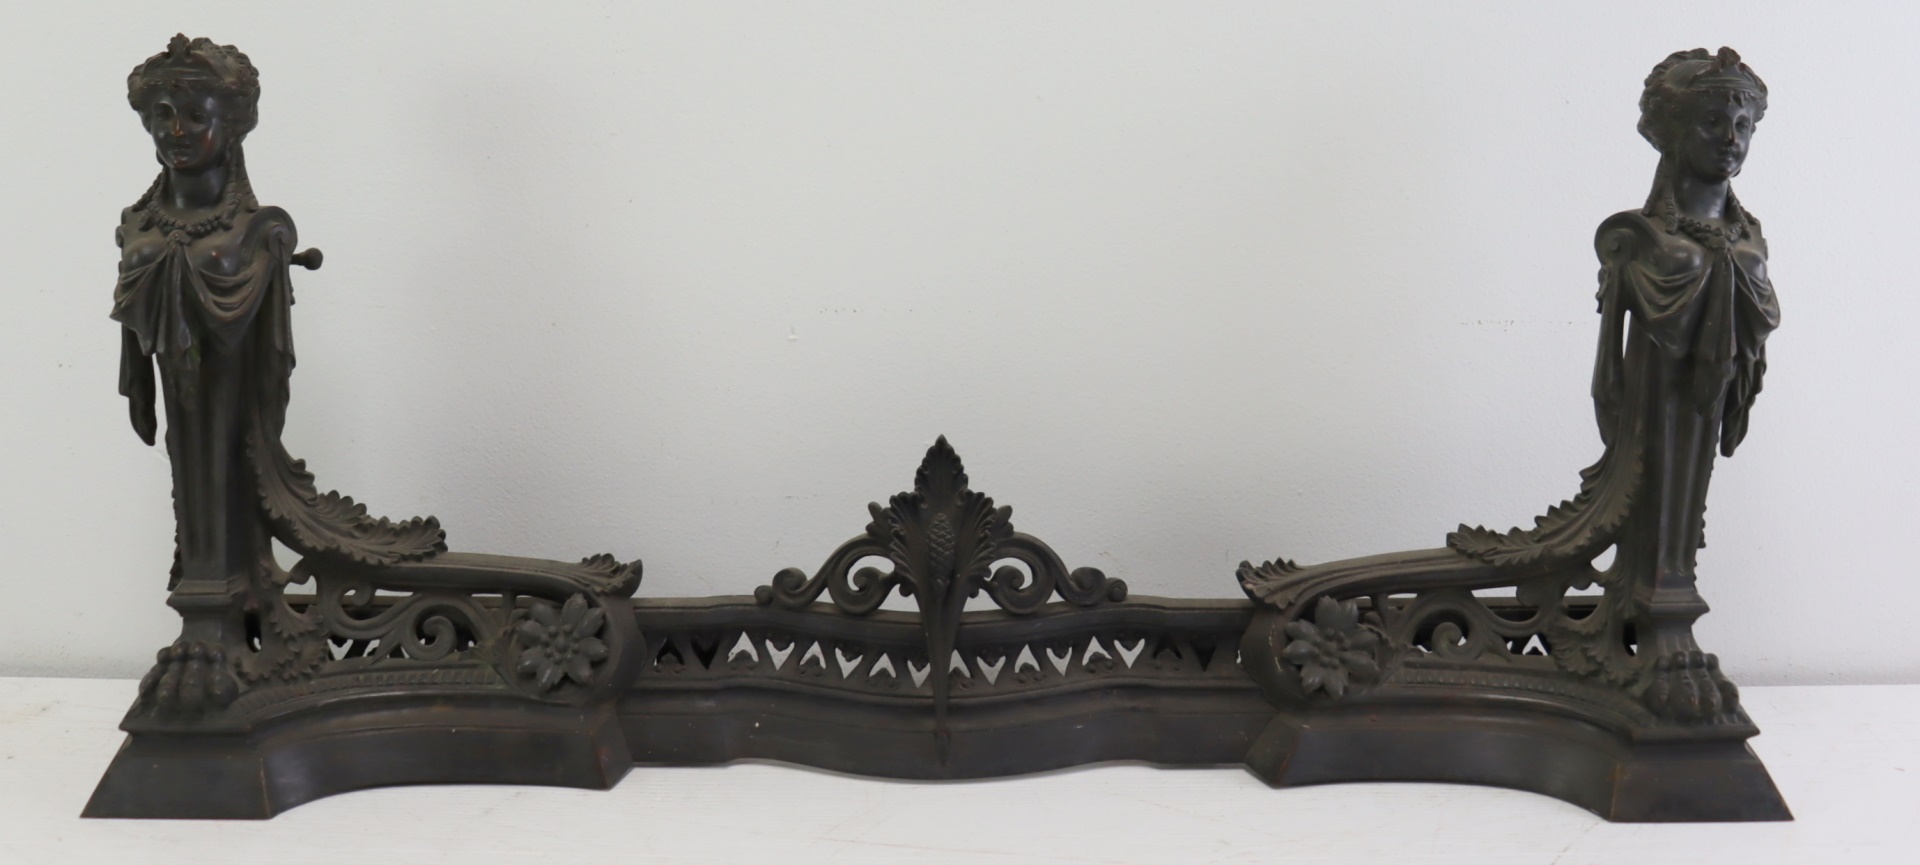 ANTIQUE NEOCLASSICAL STYLE BRONZE 3b7aa6